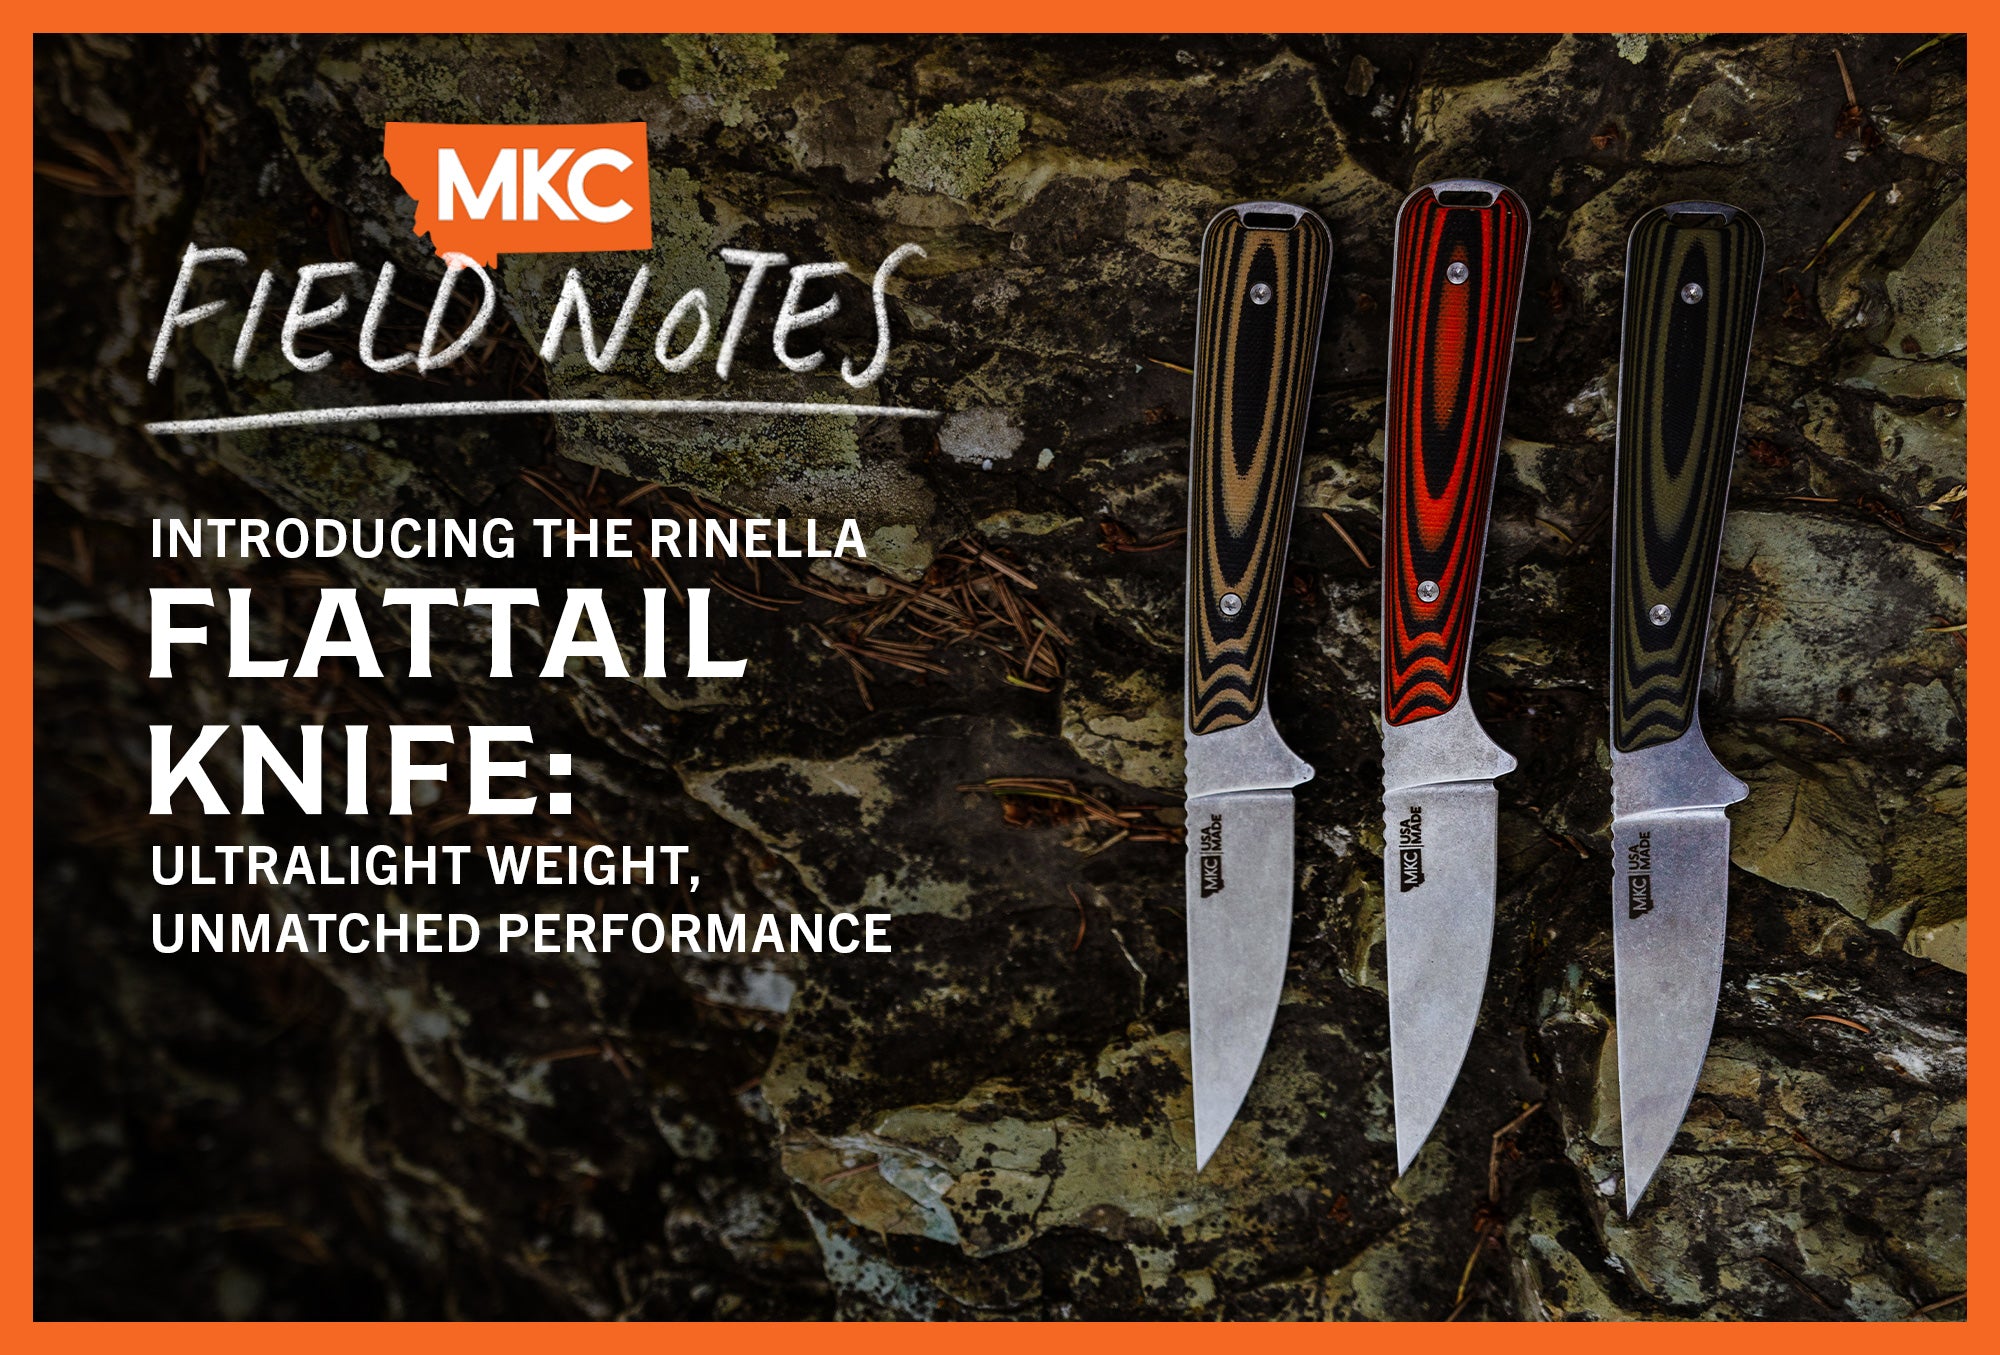 A top-down view of three variations of the Rinella Flattail knife, resting on a damp, mossy log.